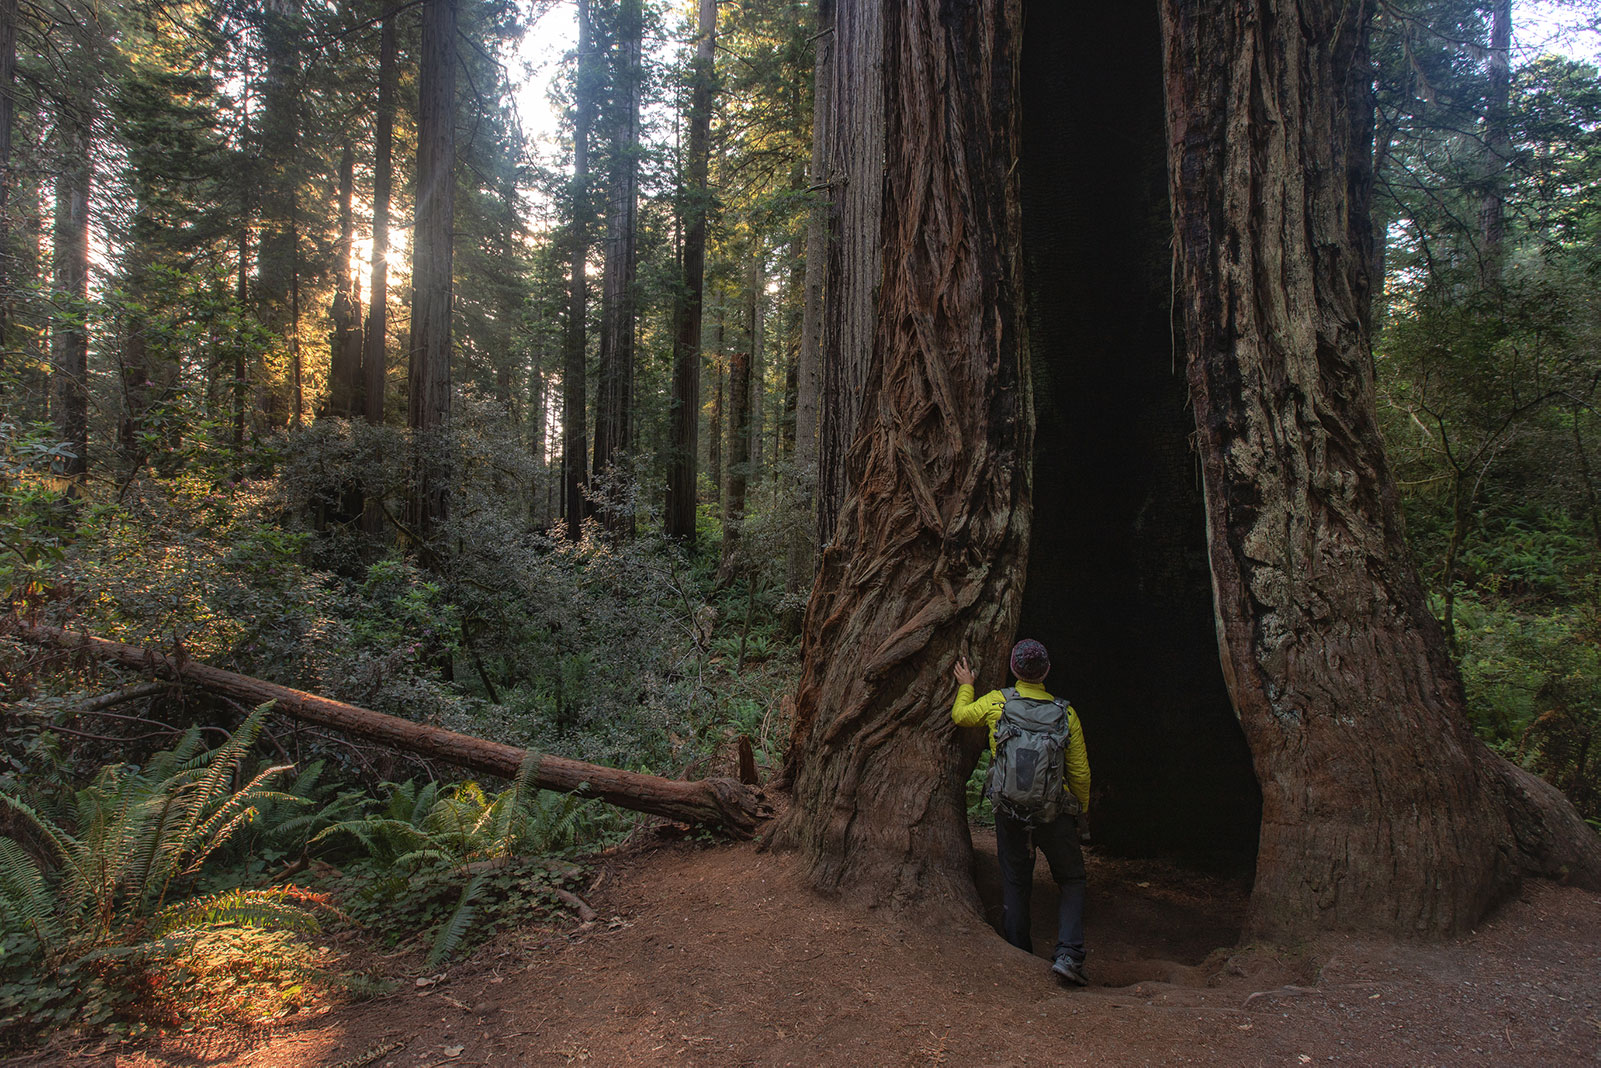 A hiker stands near the base of a giant redwood that is hollowed out but still standing.